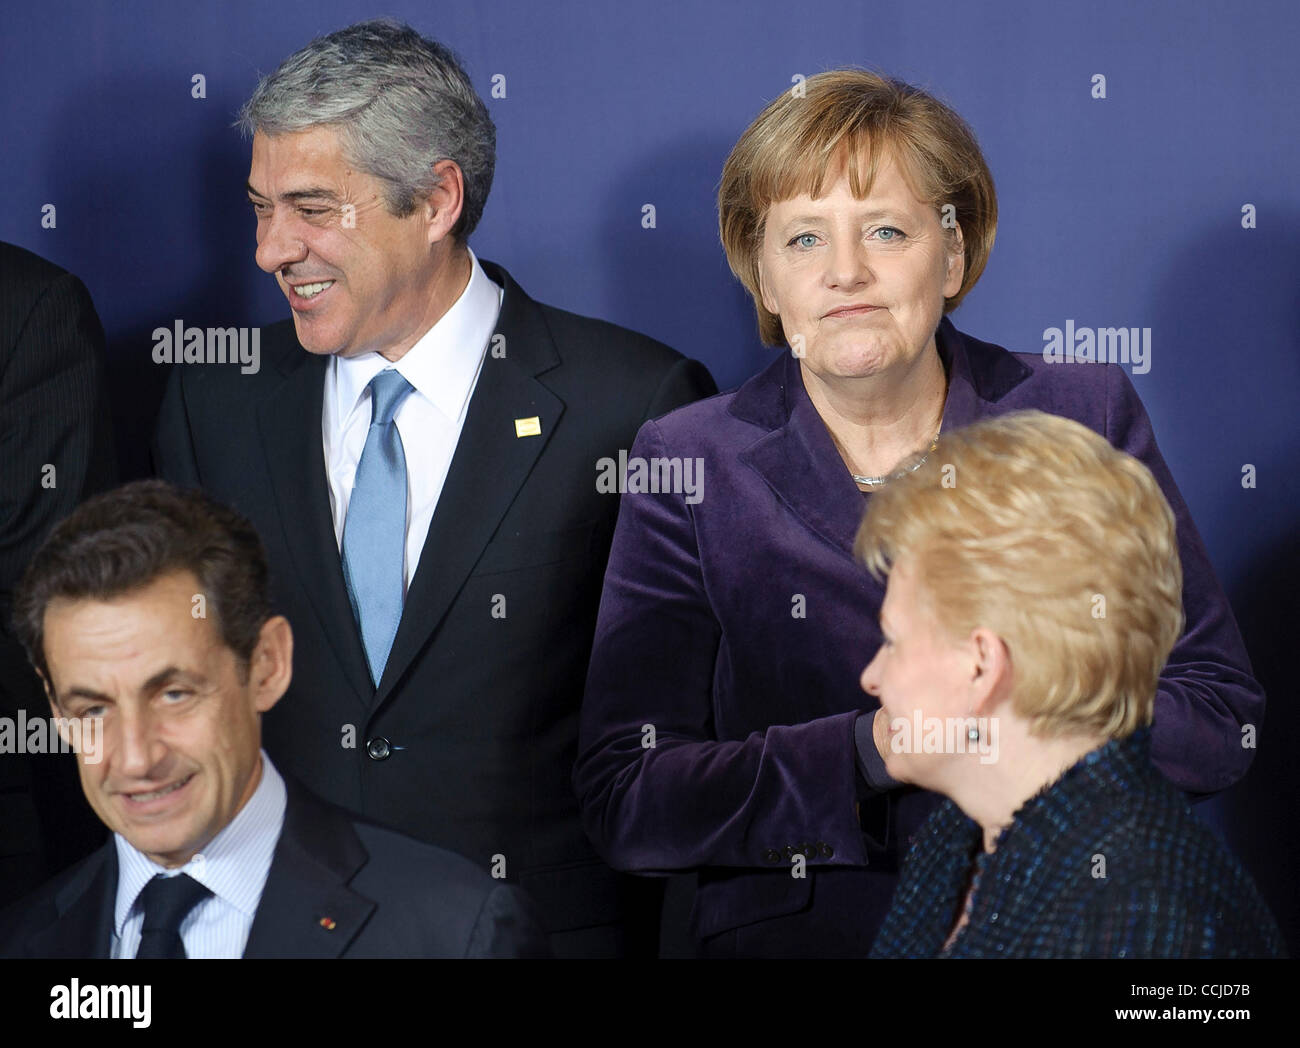 Dec. 16, 2010 - Brussels, BXL, Belgium -  (L-R)  Portuguese Prime Minister Jose Socrates, French President Nicolas Sarkozy, German Chancellor Angela Merkel, Lithuanian Prime Minister Dalia Grybauskaite  before a family photo of the EU summit  at European Councill headquarters in  Brussels, Belgium o Stock Photo